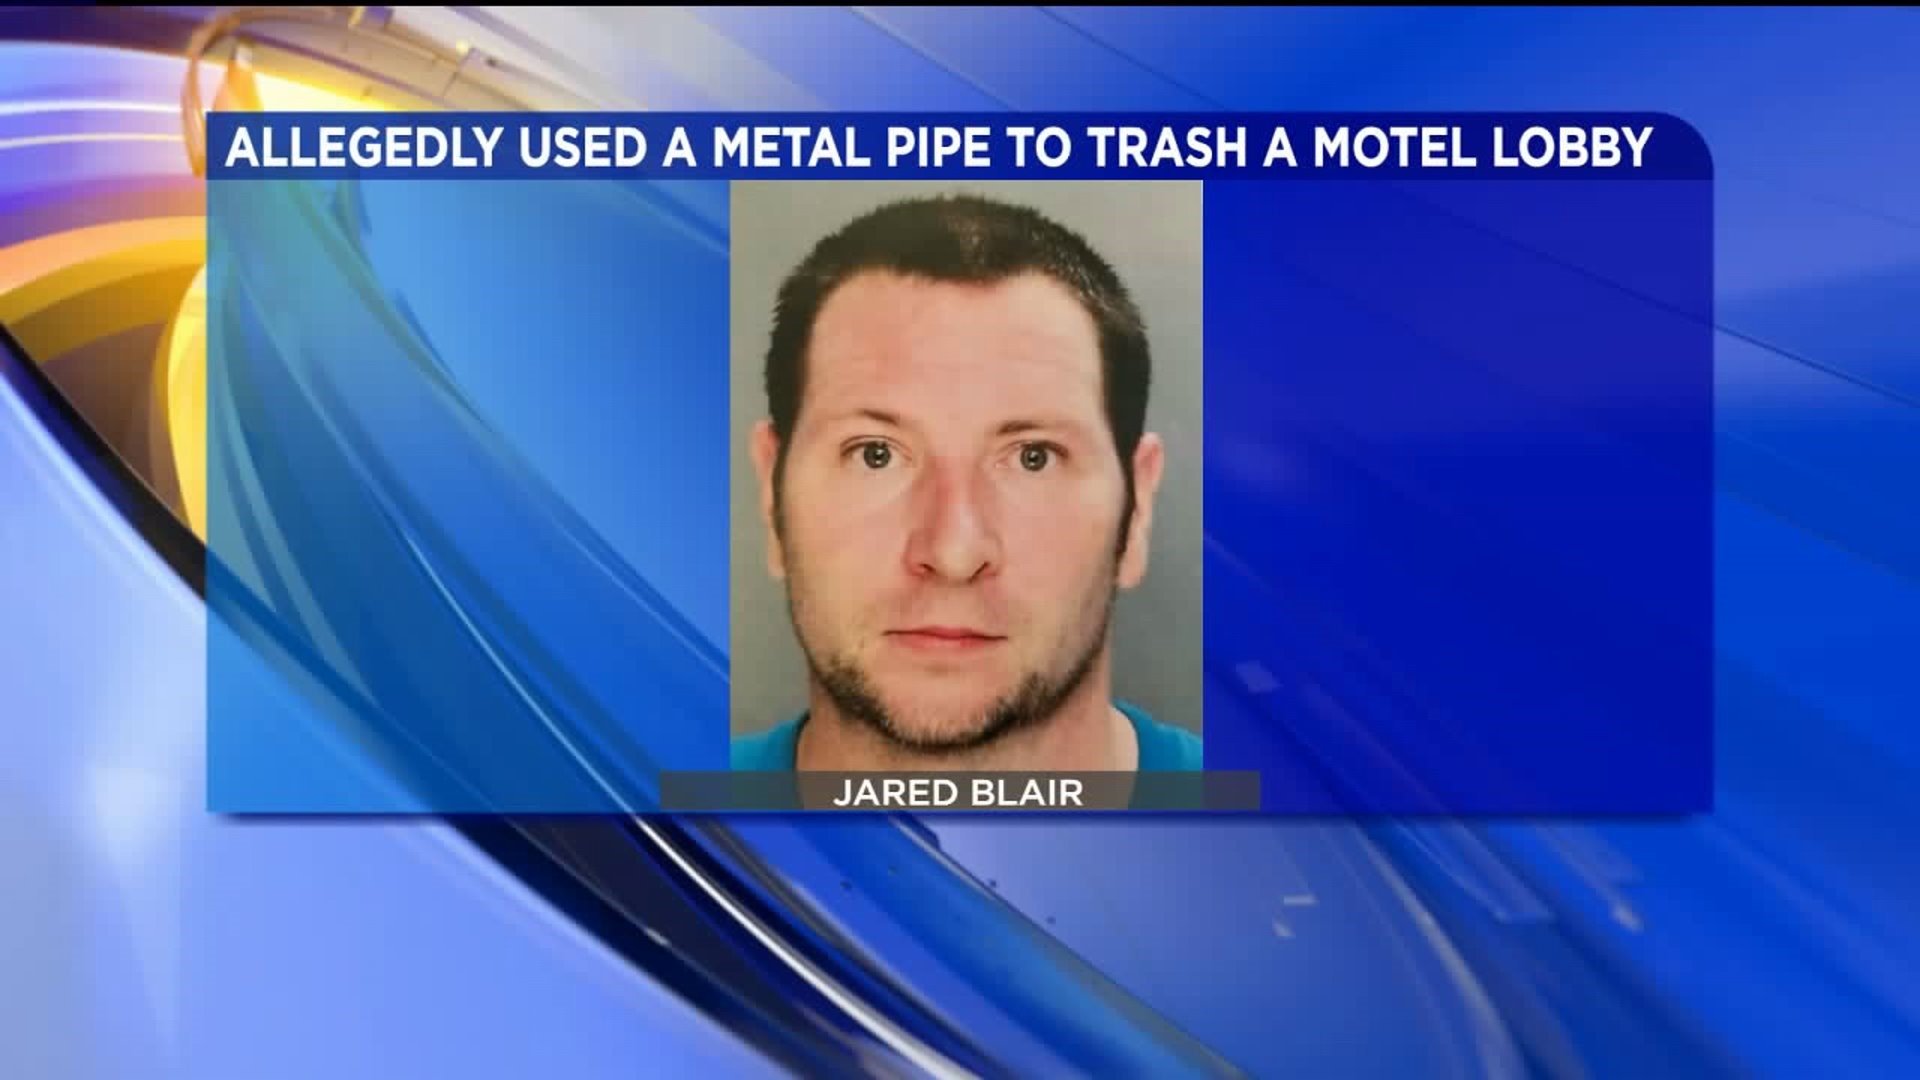 Cops: Man High on Meth Threatened Worker, Trashed Motel